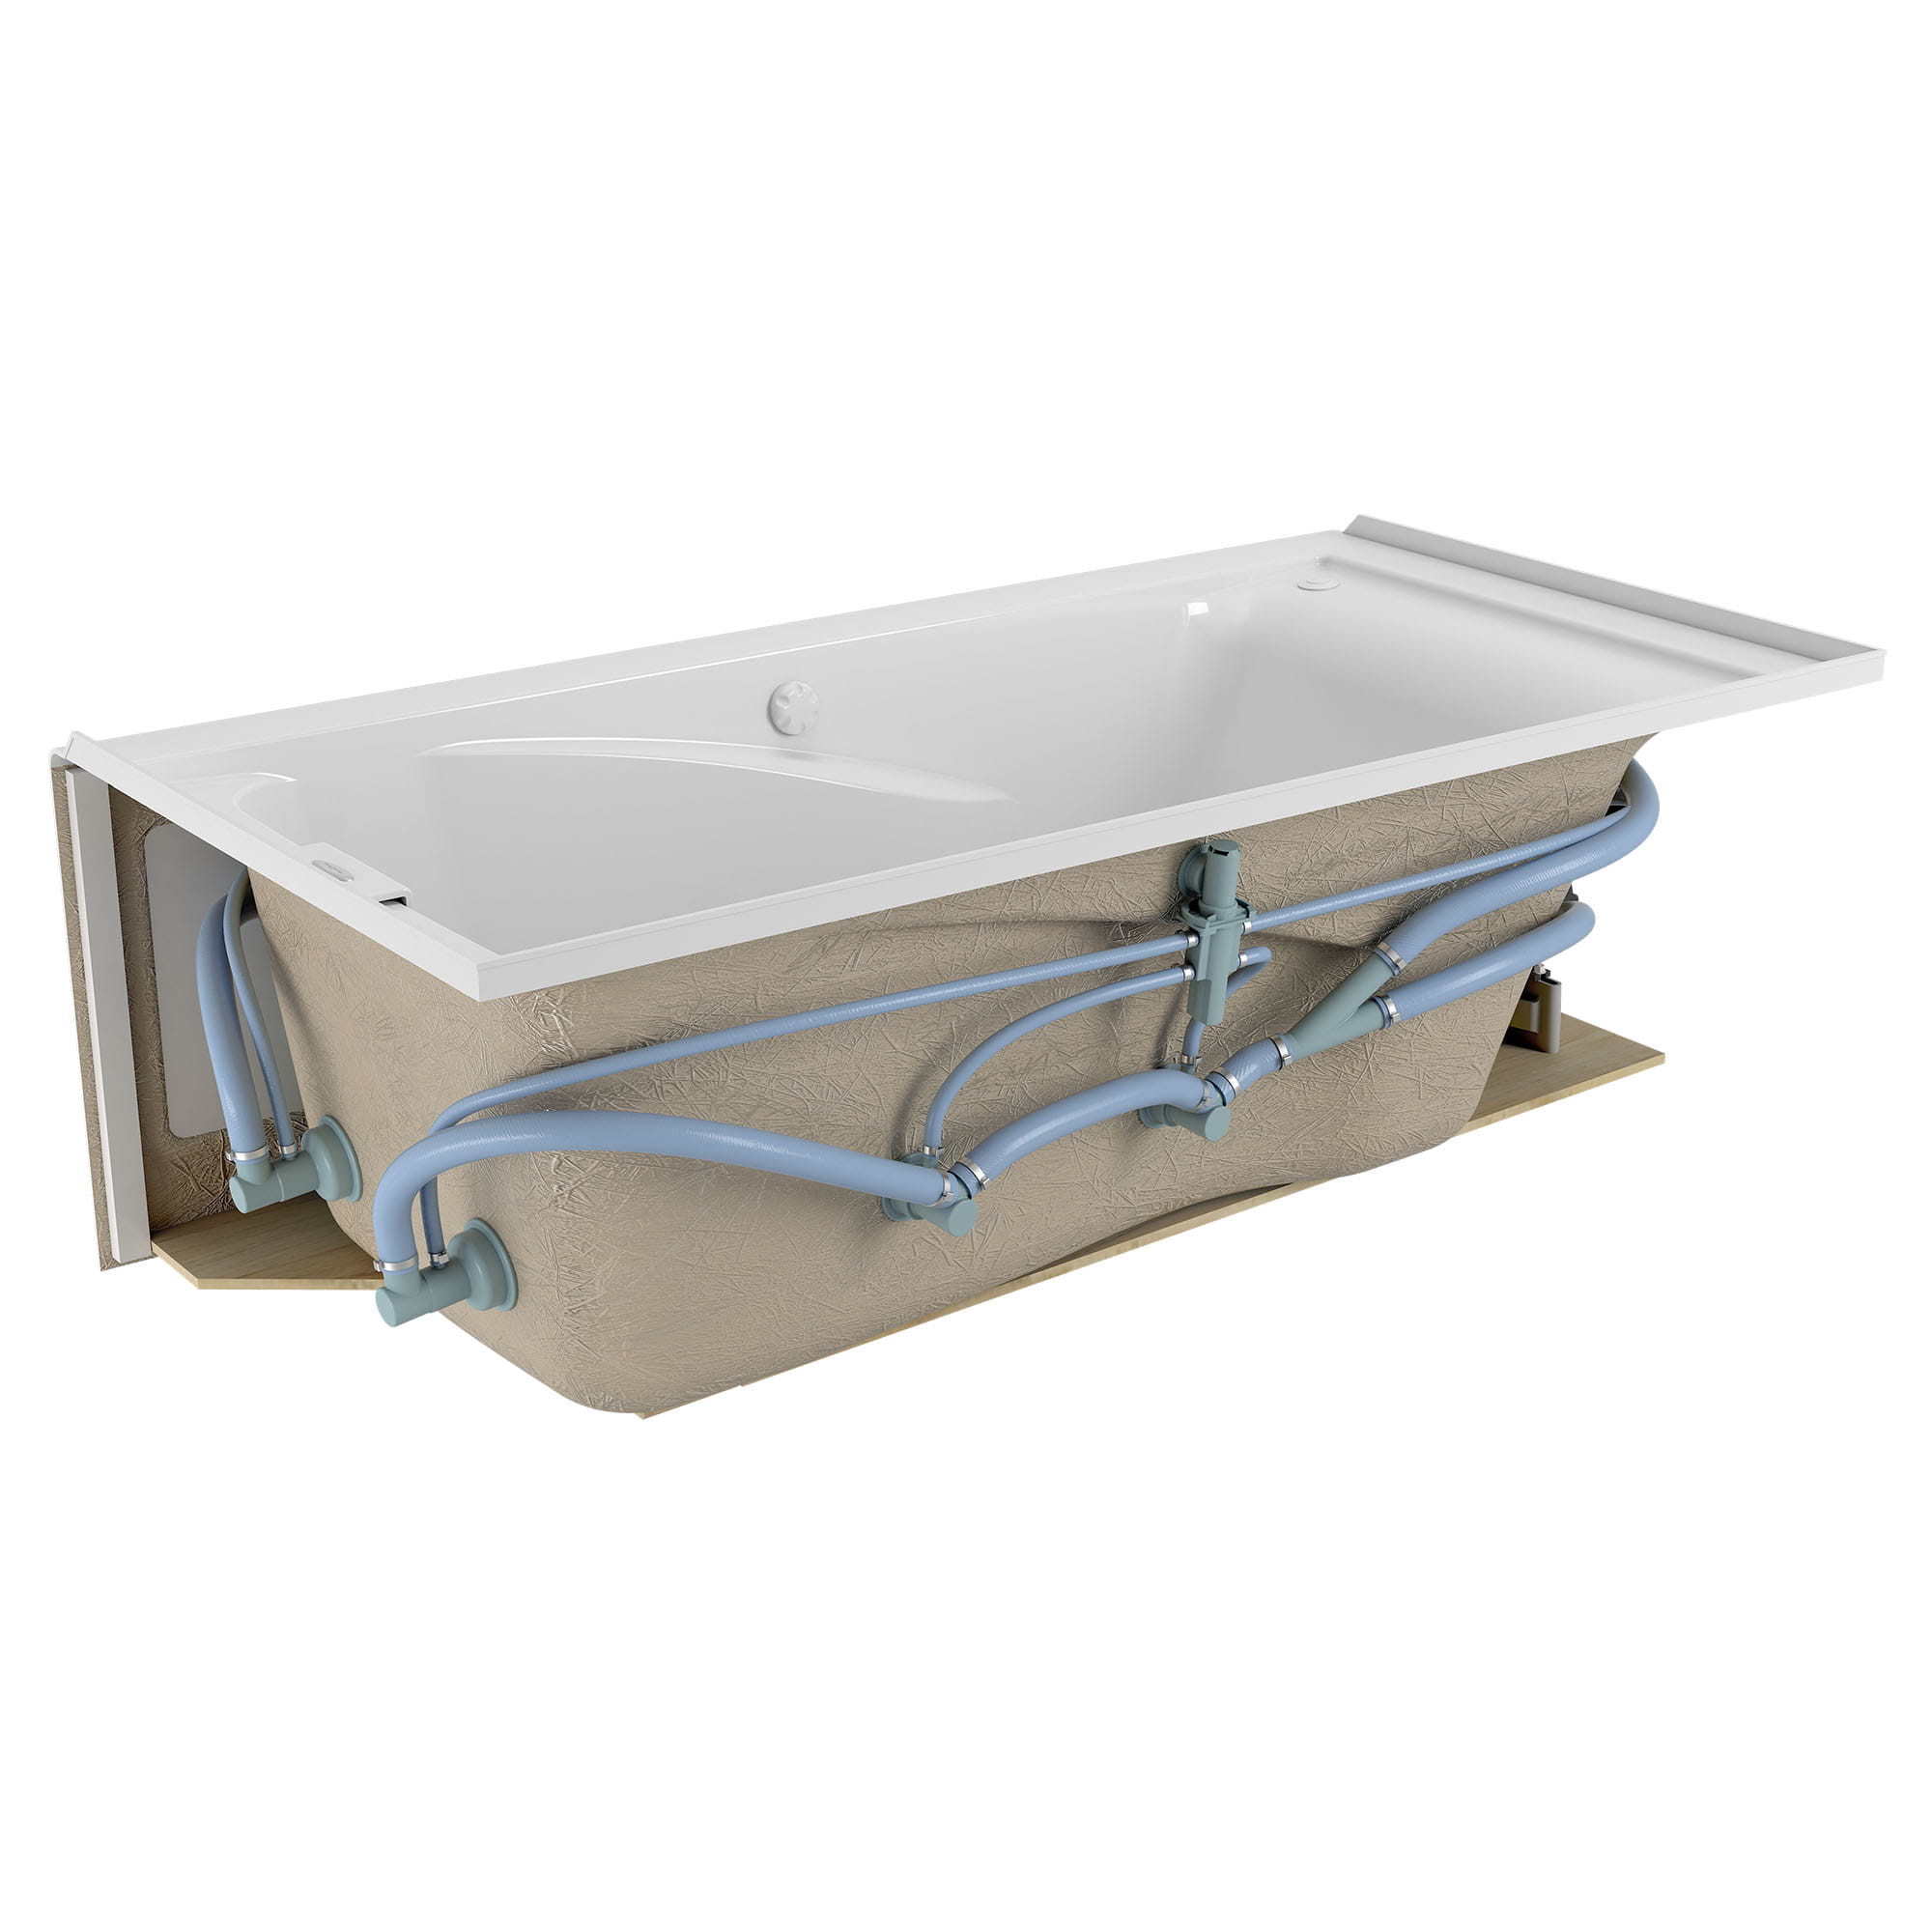 Mainstream 60in x 32in 8-Jet Whirlpool Tub with Right-Hand Drain